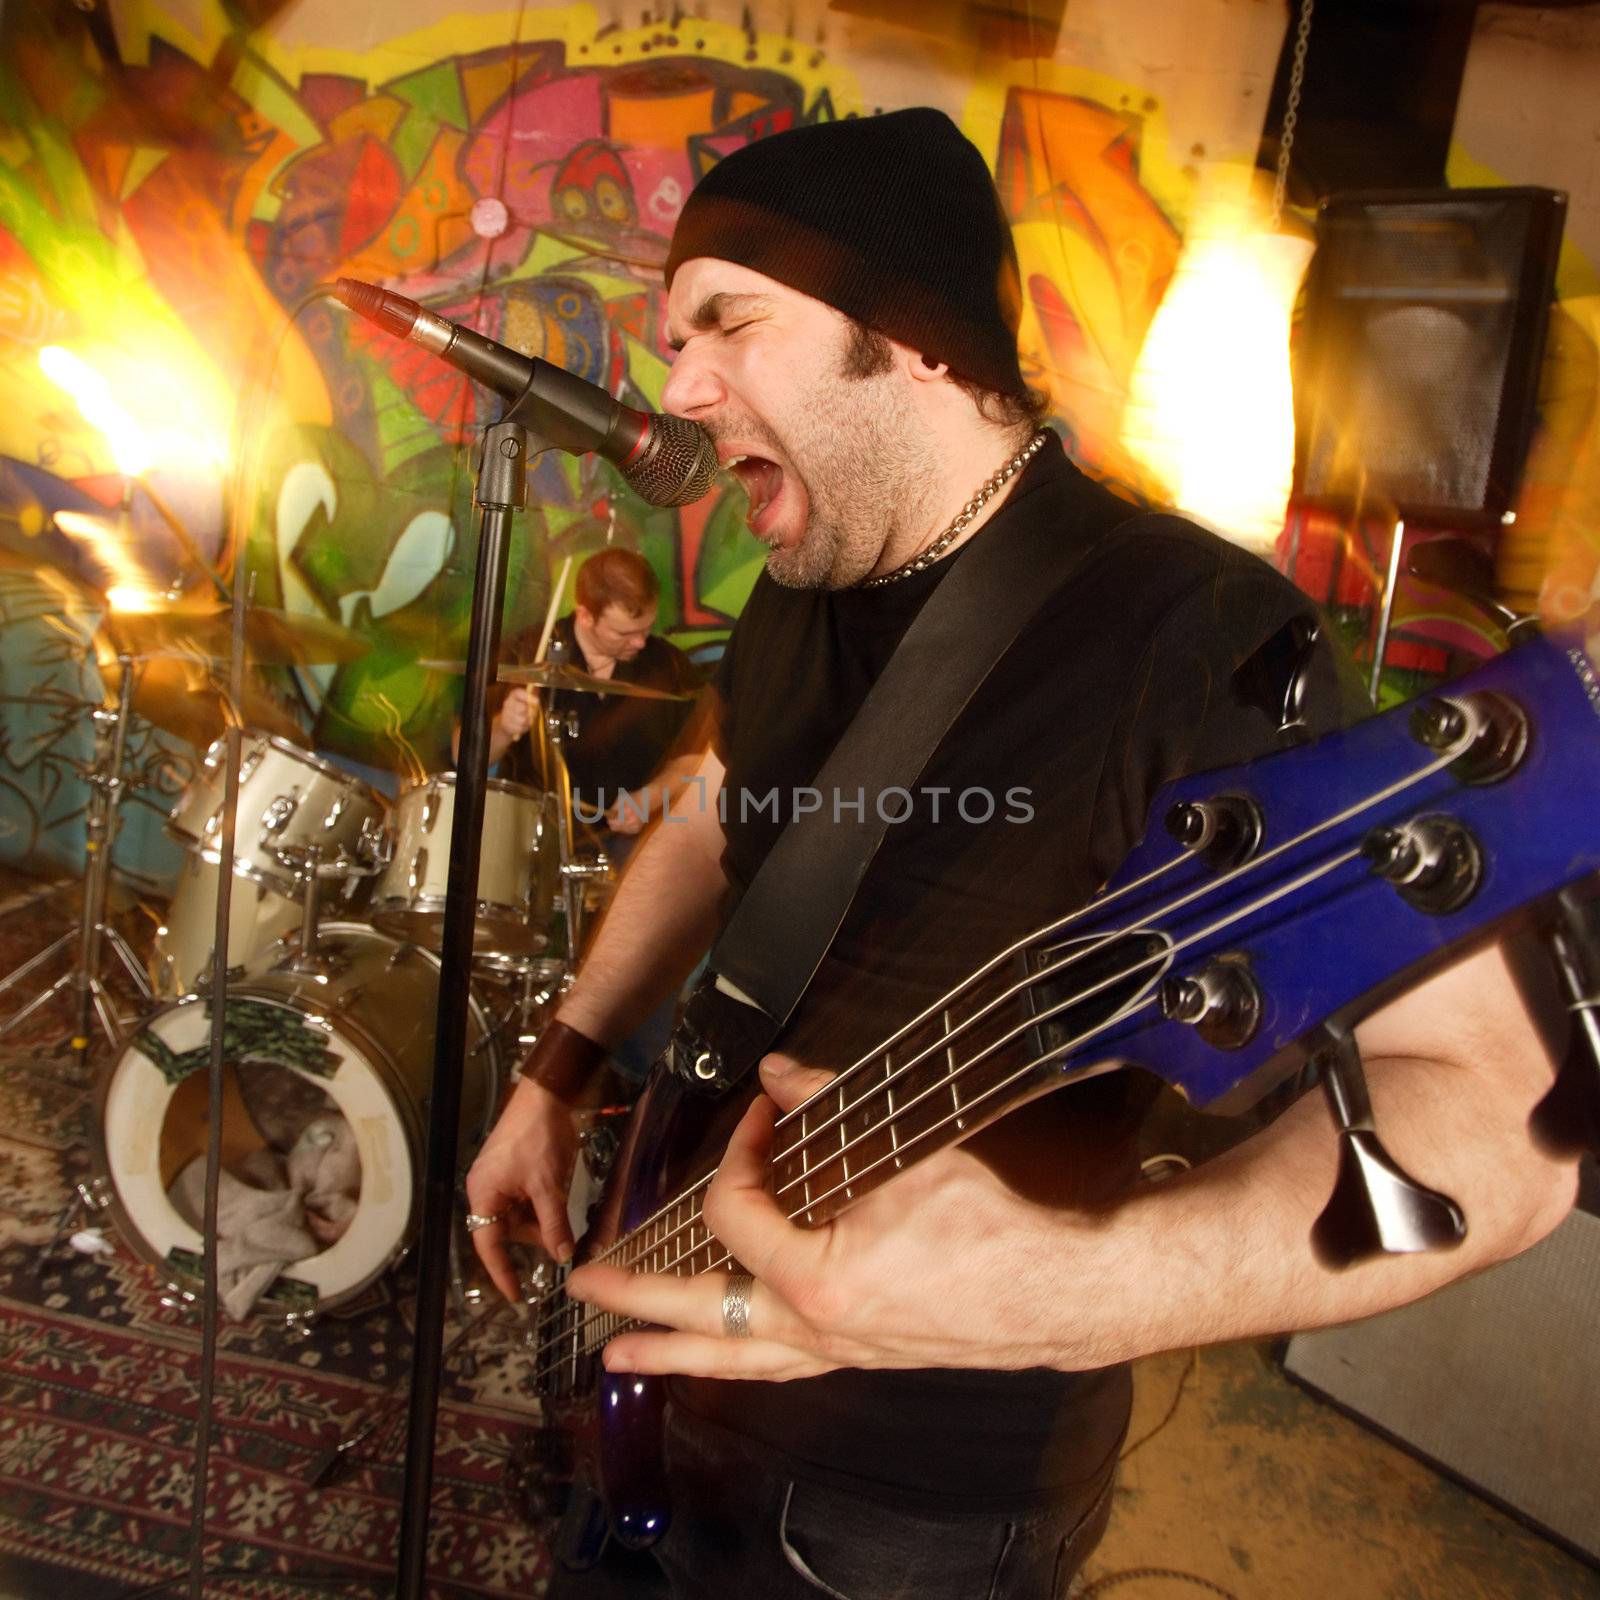 Heavy rock band with bassist and drummer playing. Shot with strobes and slow shutter speed to create lighting atmosphere and blur effects.
